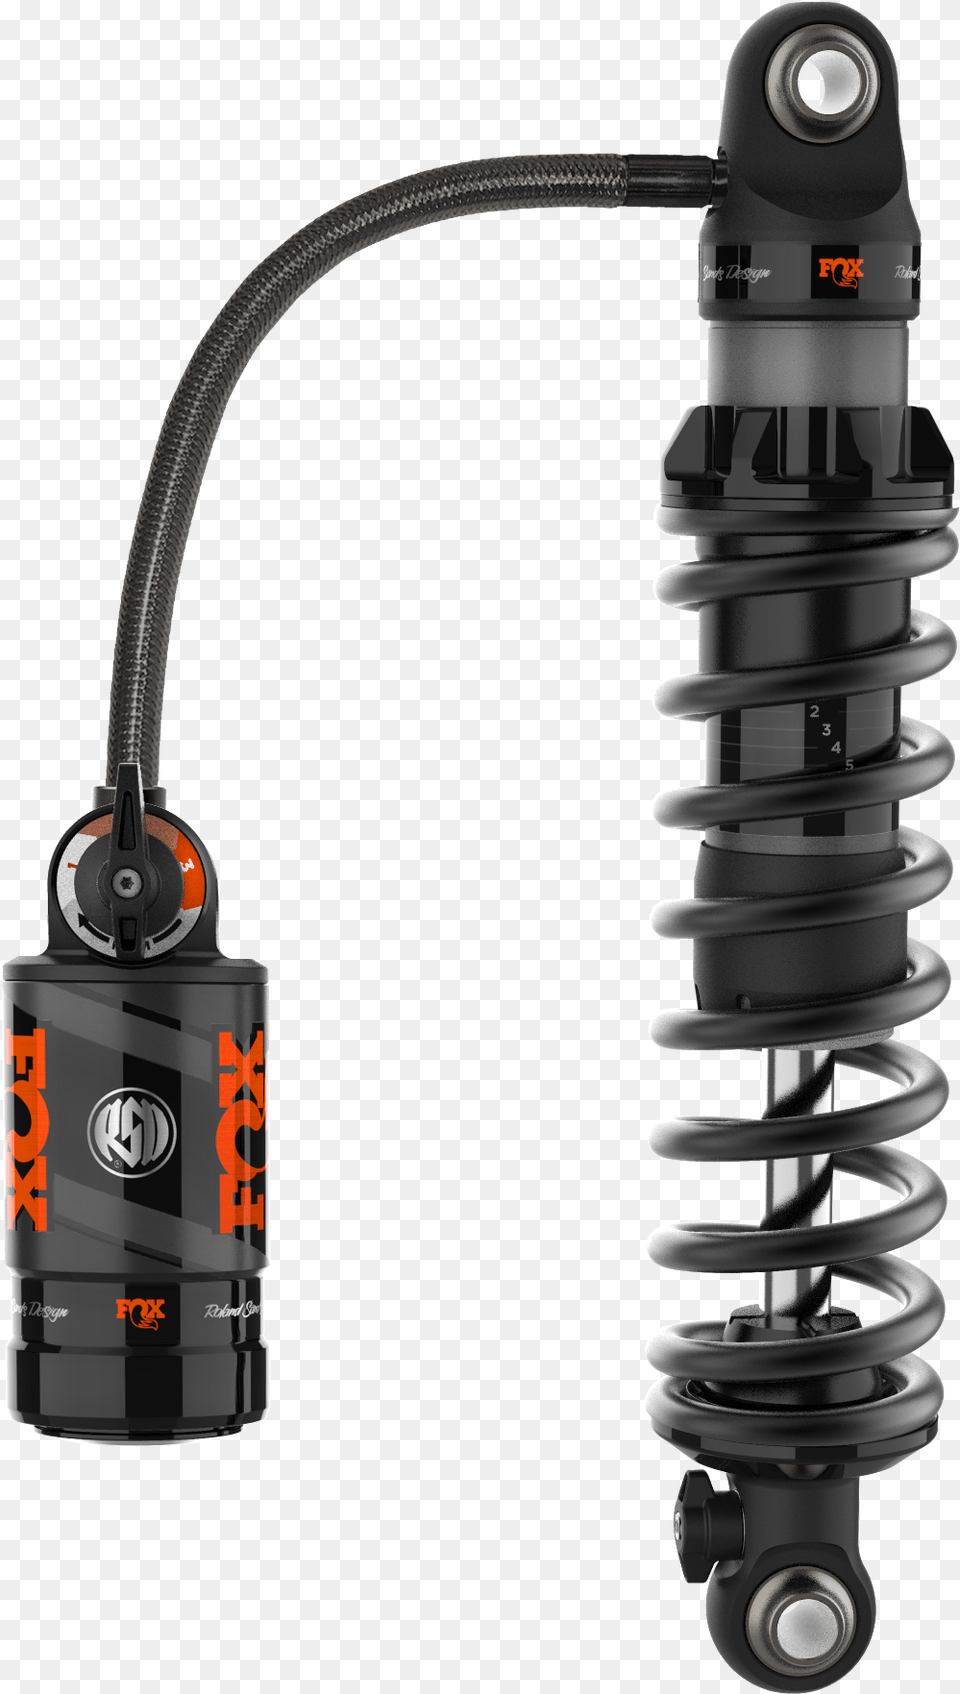 Fox Suspension Fox Shock For Touring, Coil, Spiral, Machine Png